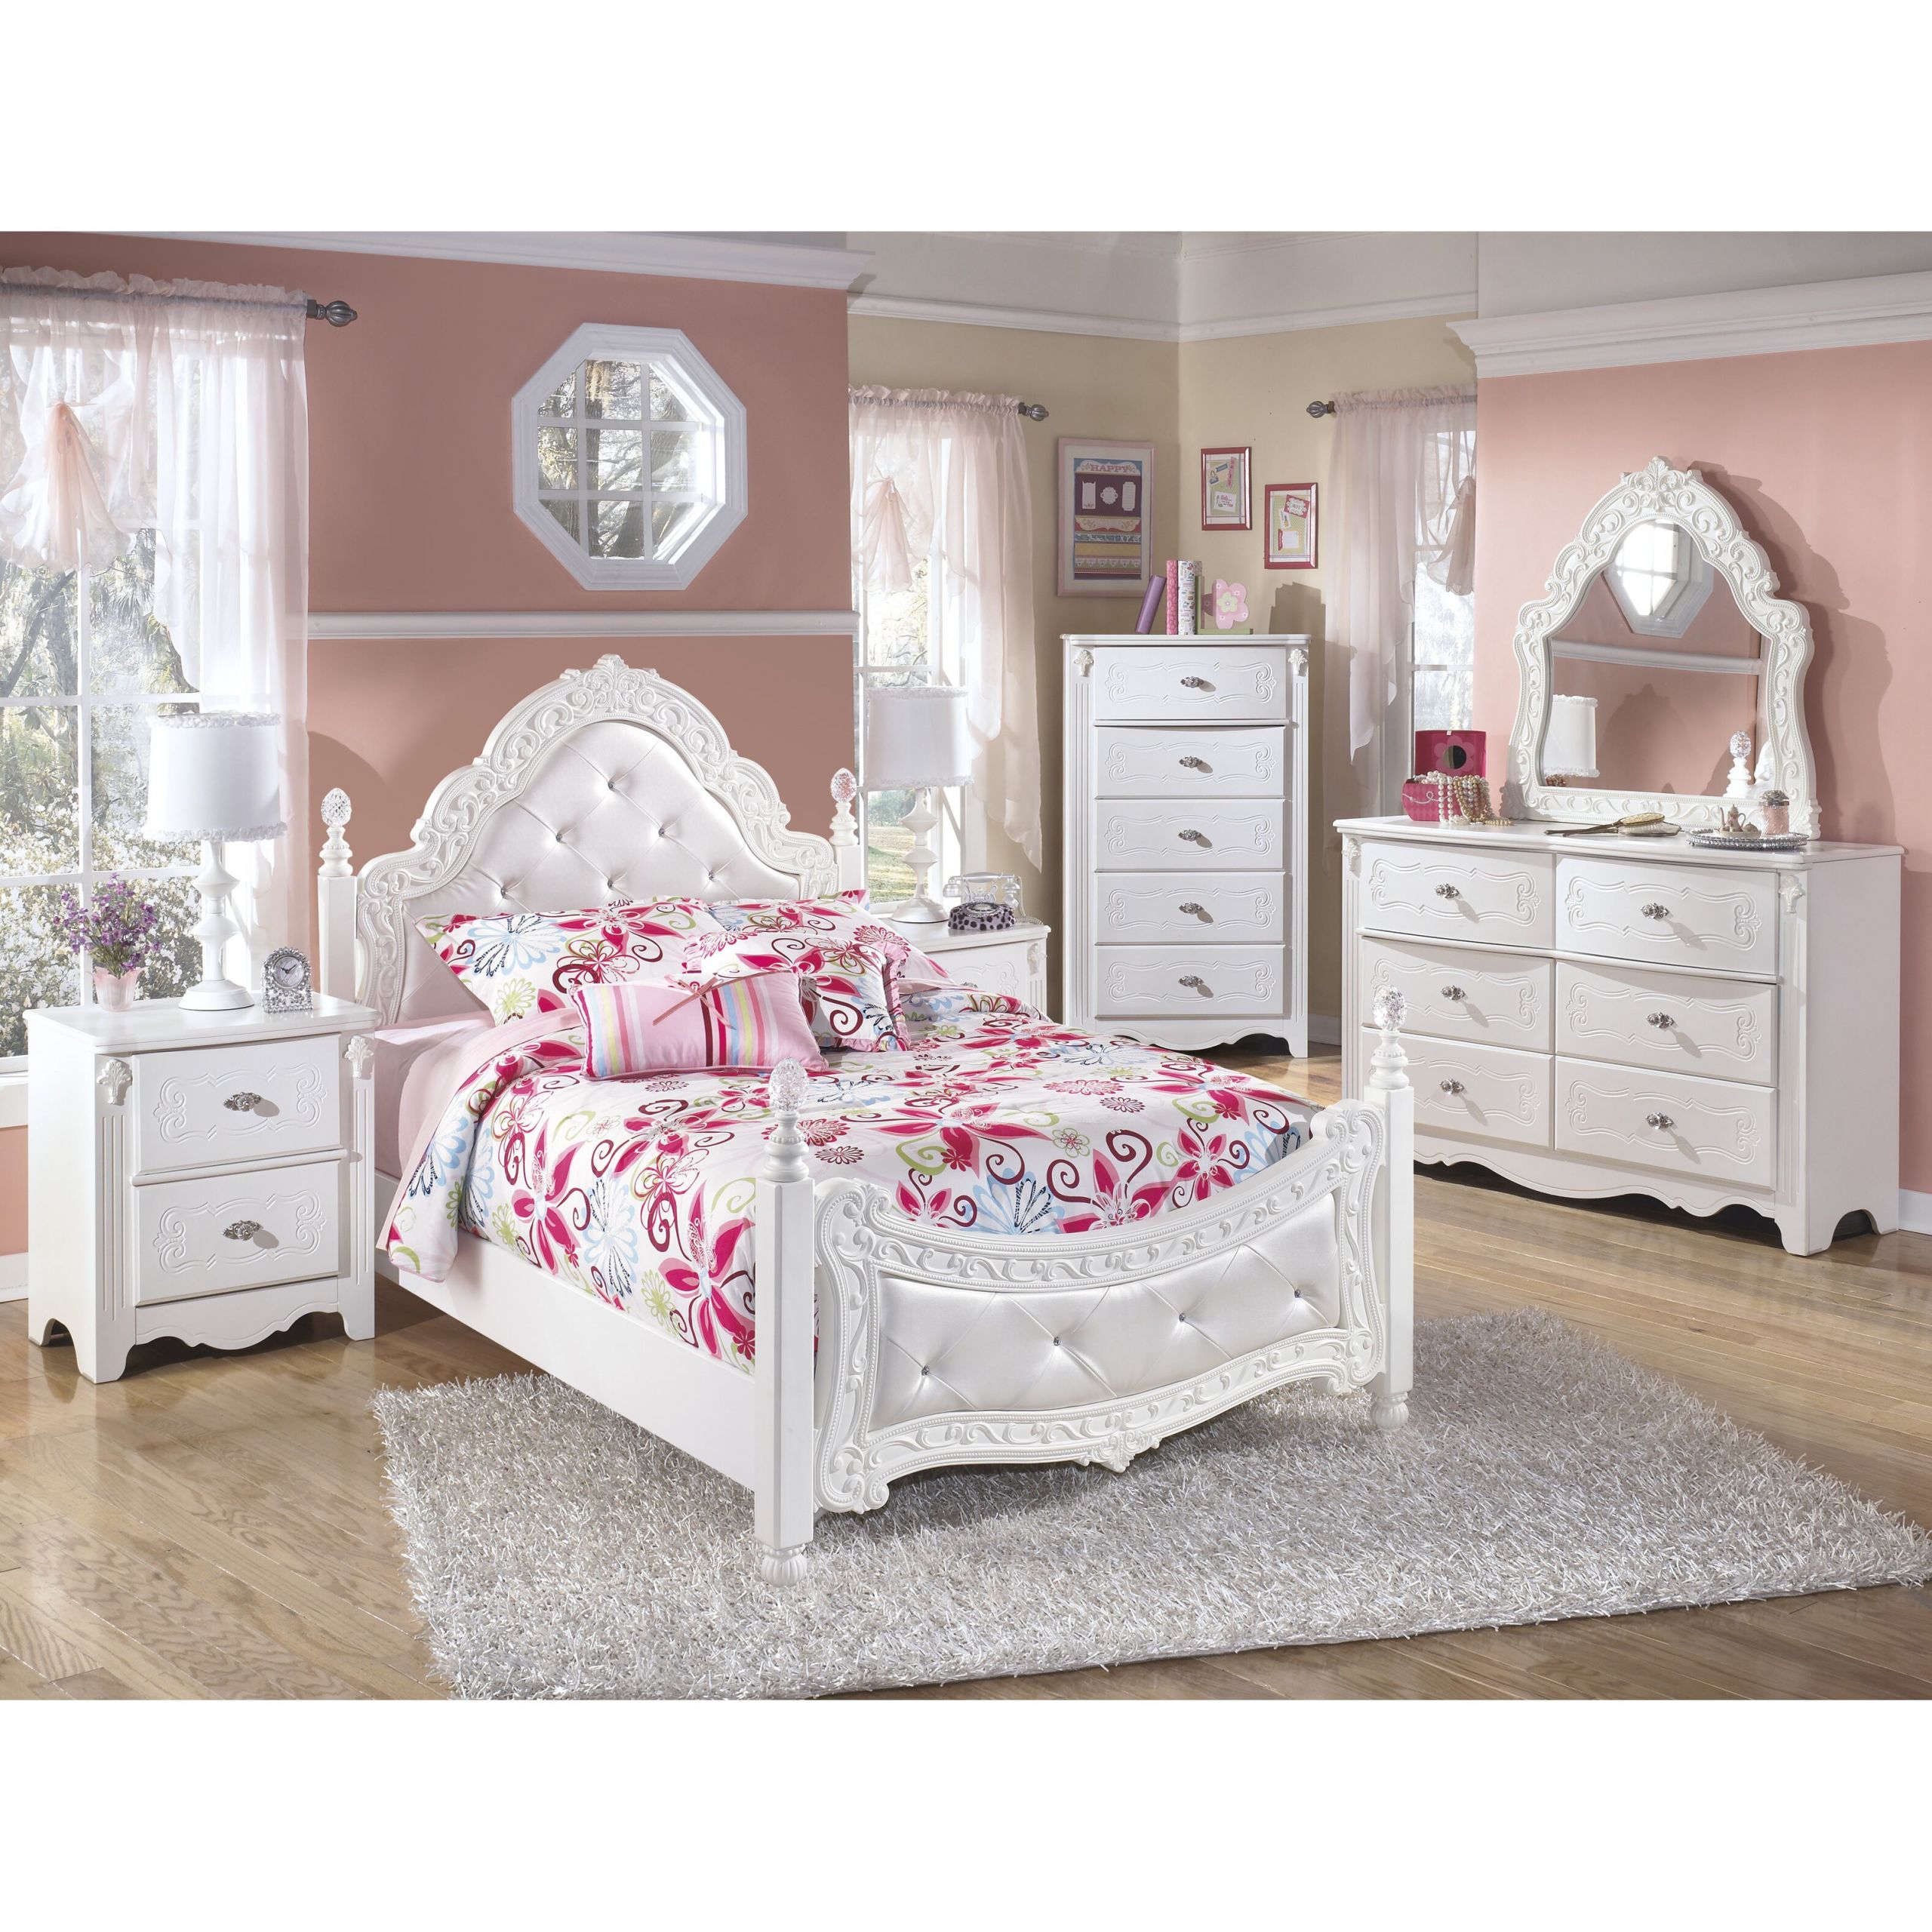 Kids White Bedroom Set
 Signature Design by Ashley Exquisite Four Poster